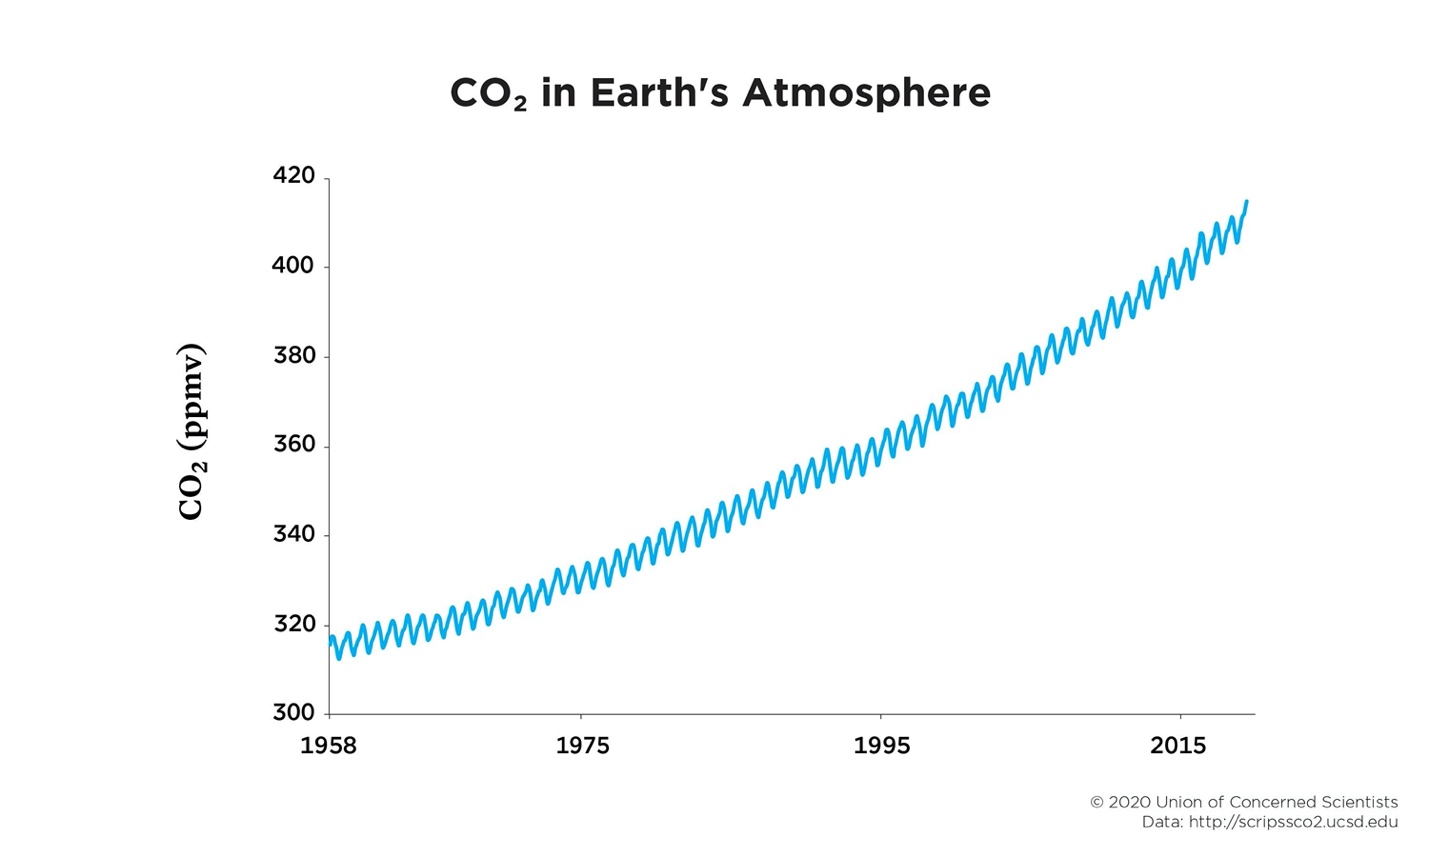 The amount of CO2 emissions in the Earth’s atmosphere over time (Union of Concerned Scientists, 2021).